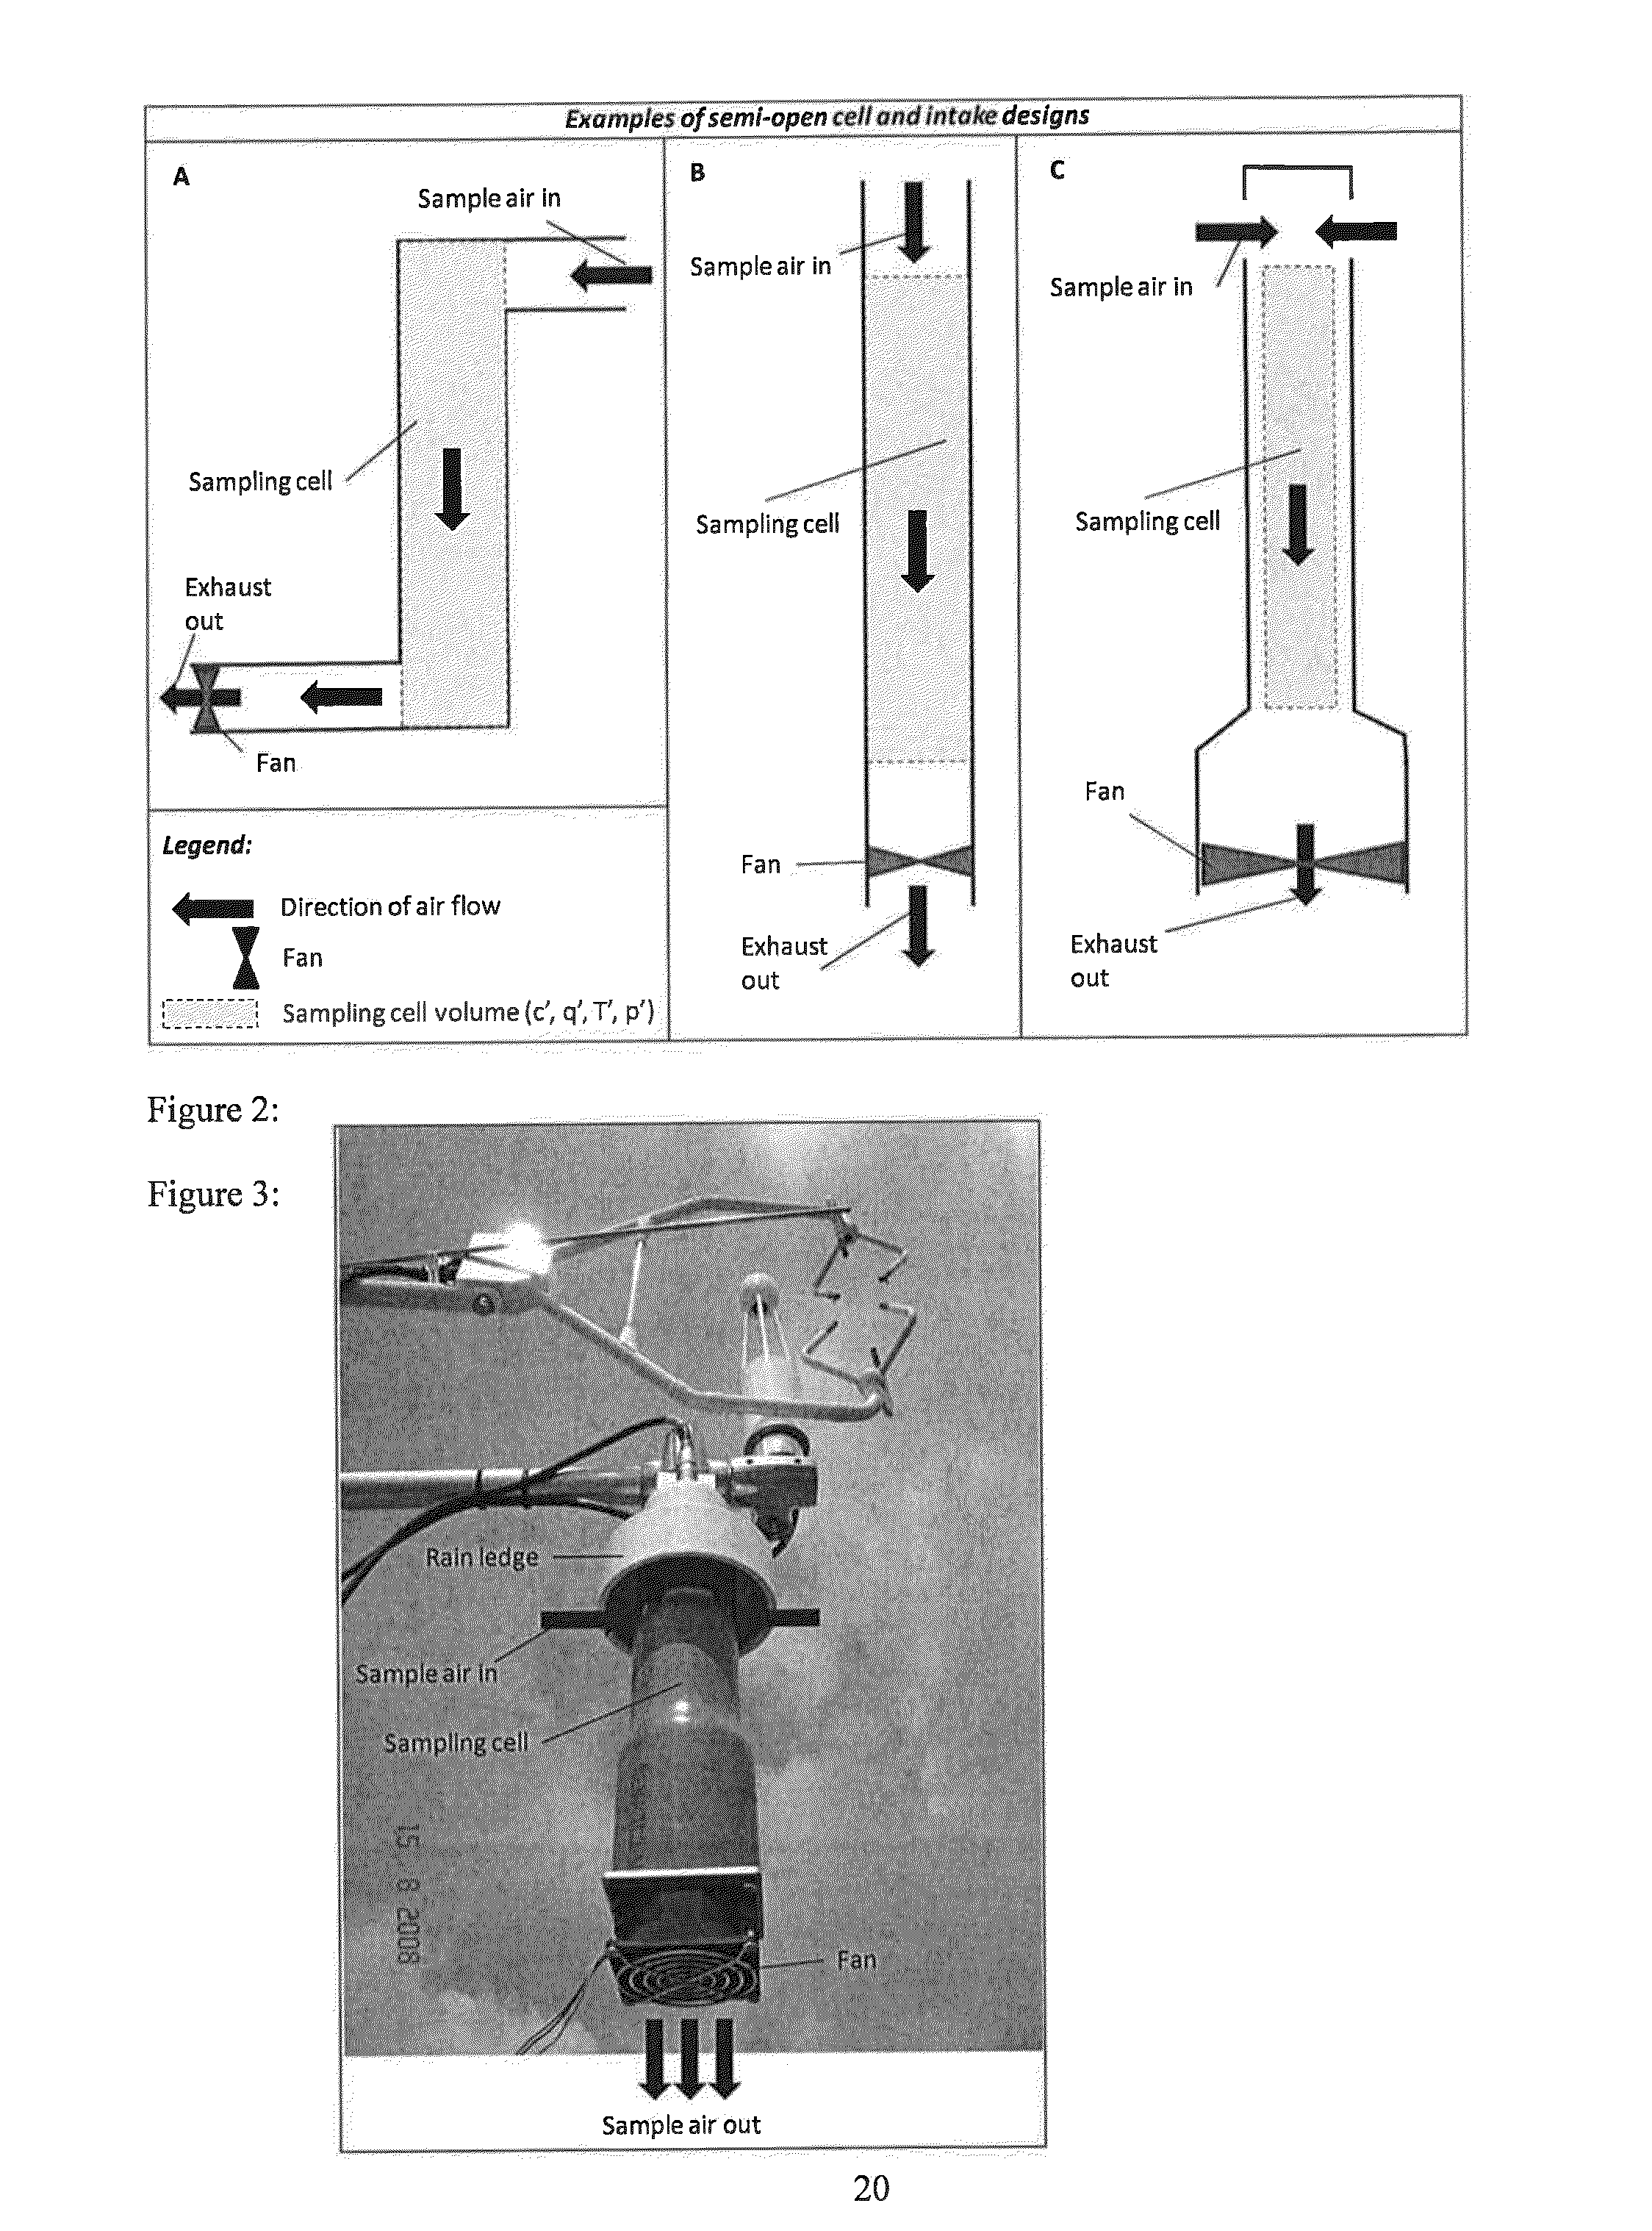 Semi-open-path gas analysis systems and methods